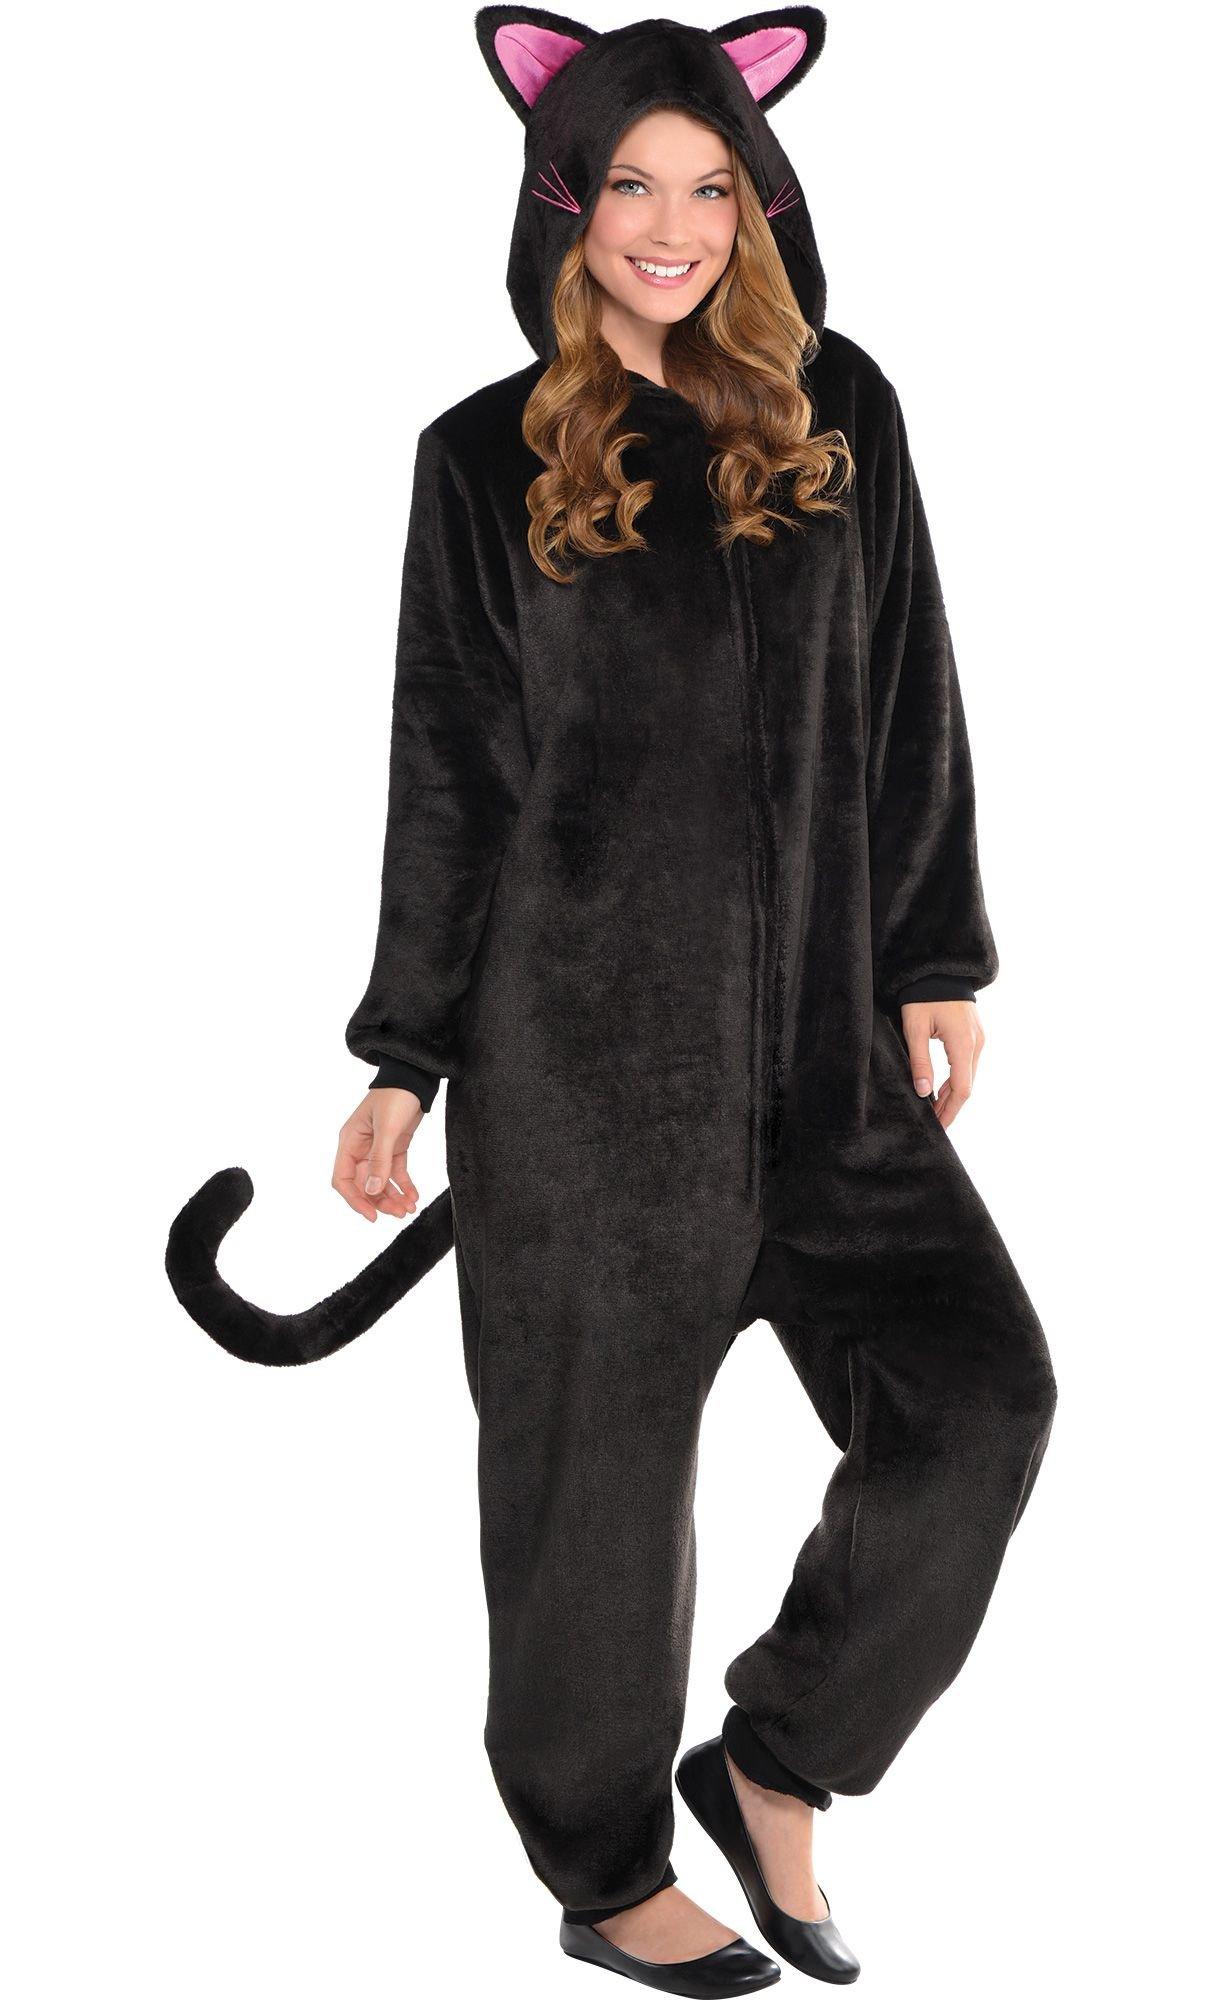 cat costumes for humans